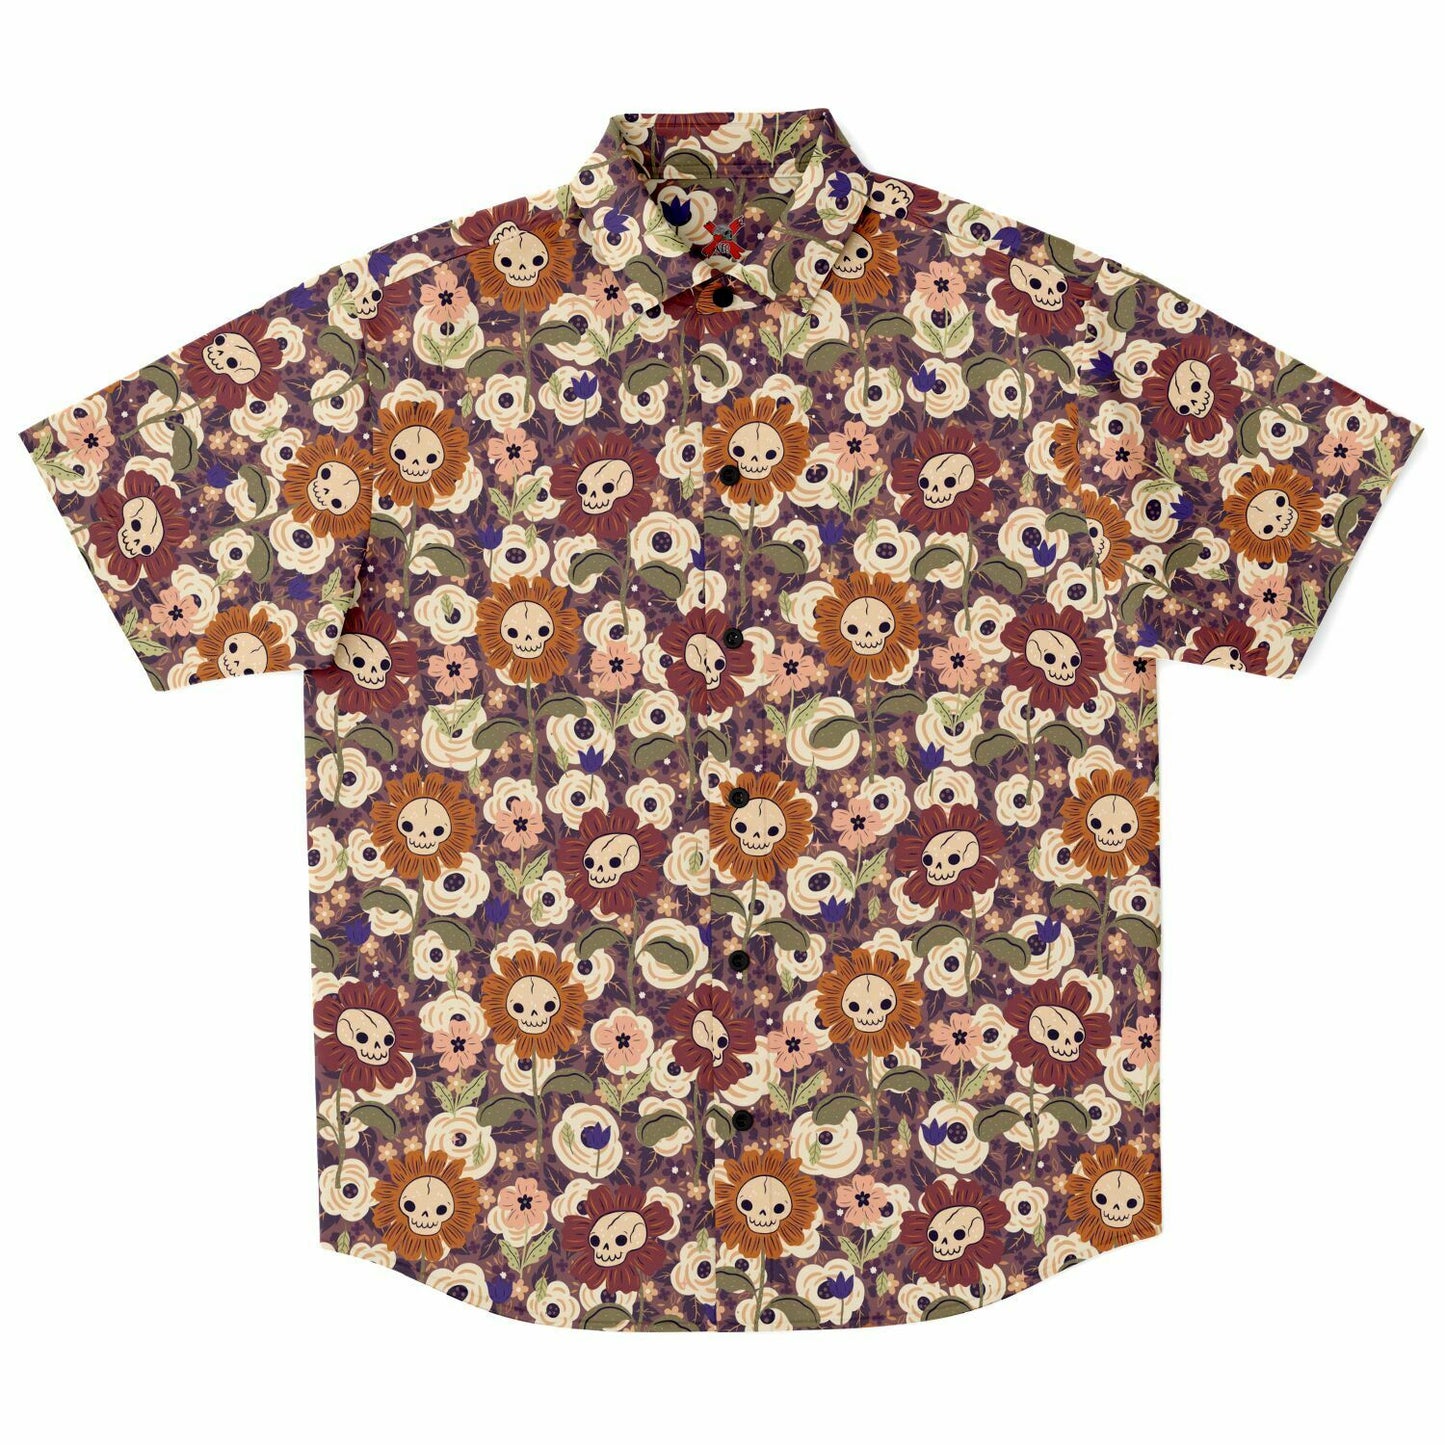 Smiling Flowers short sleeve button-up shirt